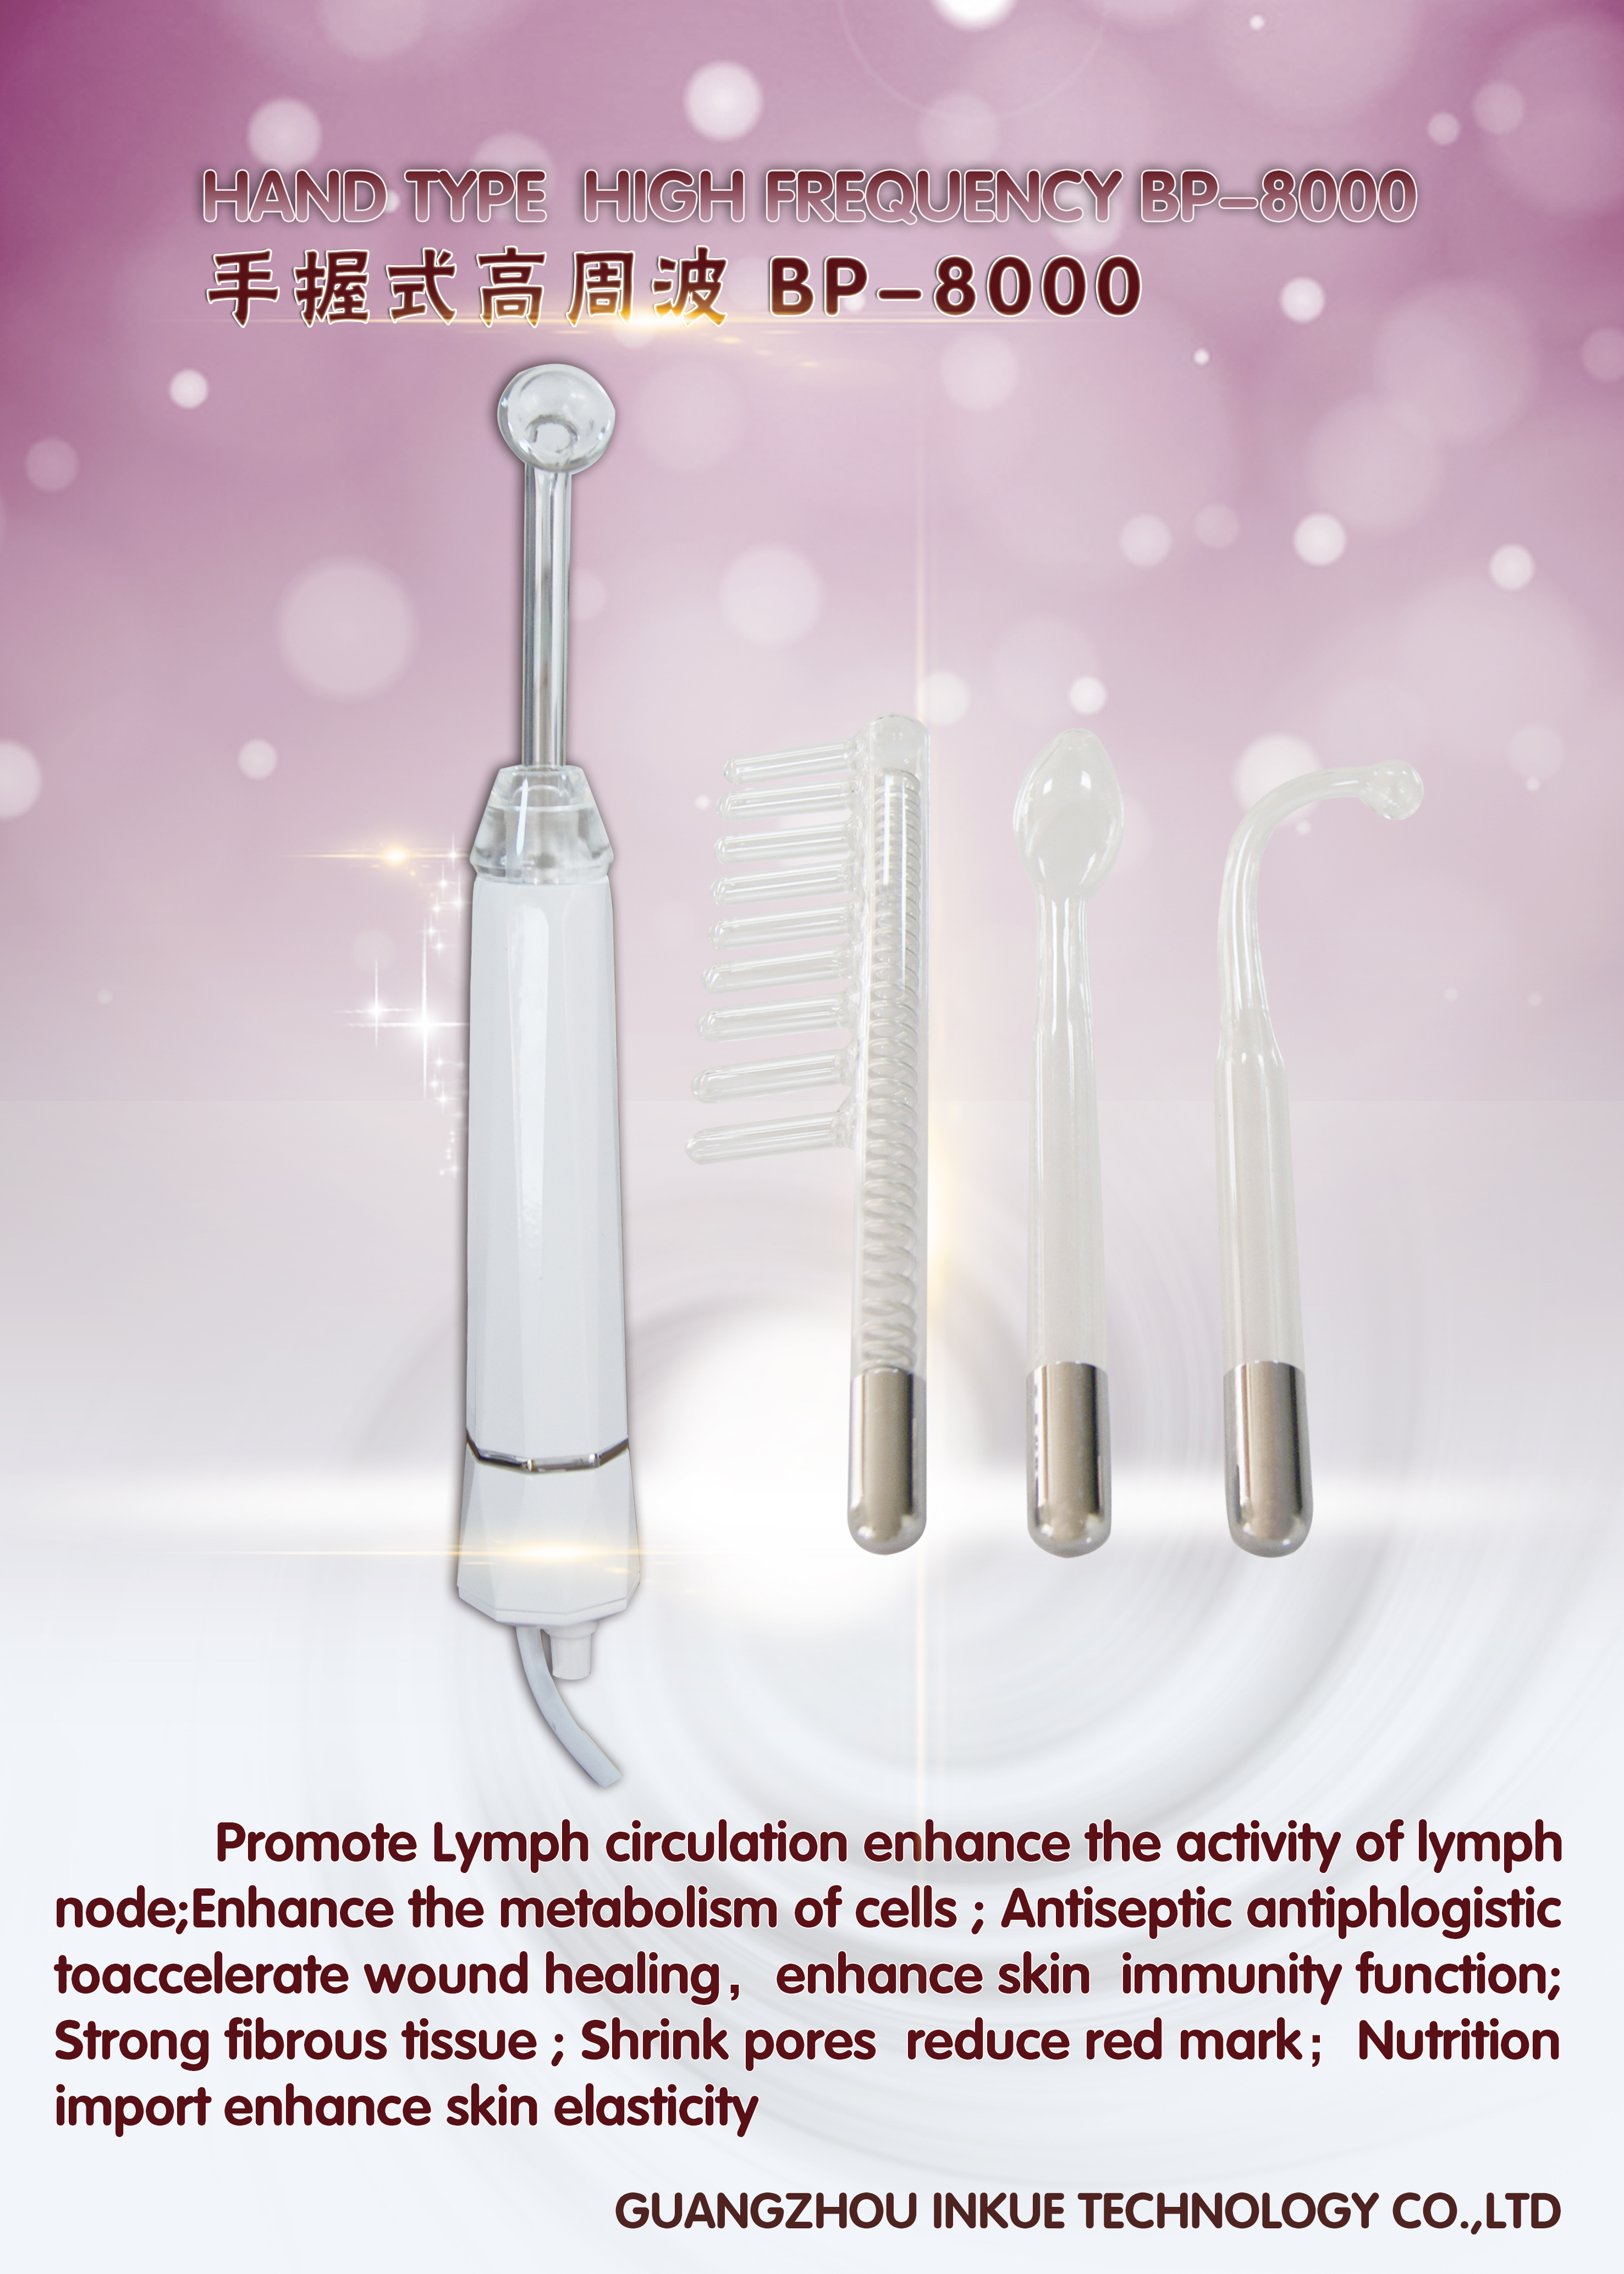 High Frequency Machine Portable Handheld High Frequency Facial Wand Acne for Skin Tightening Wrinkles Remover Beauty Eyes Body Care Facial Machine